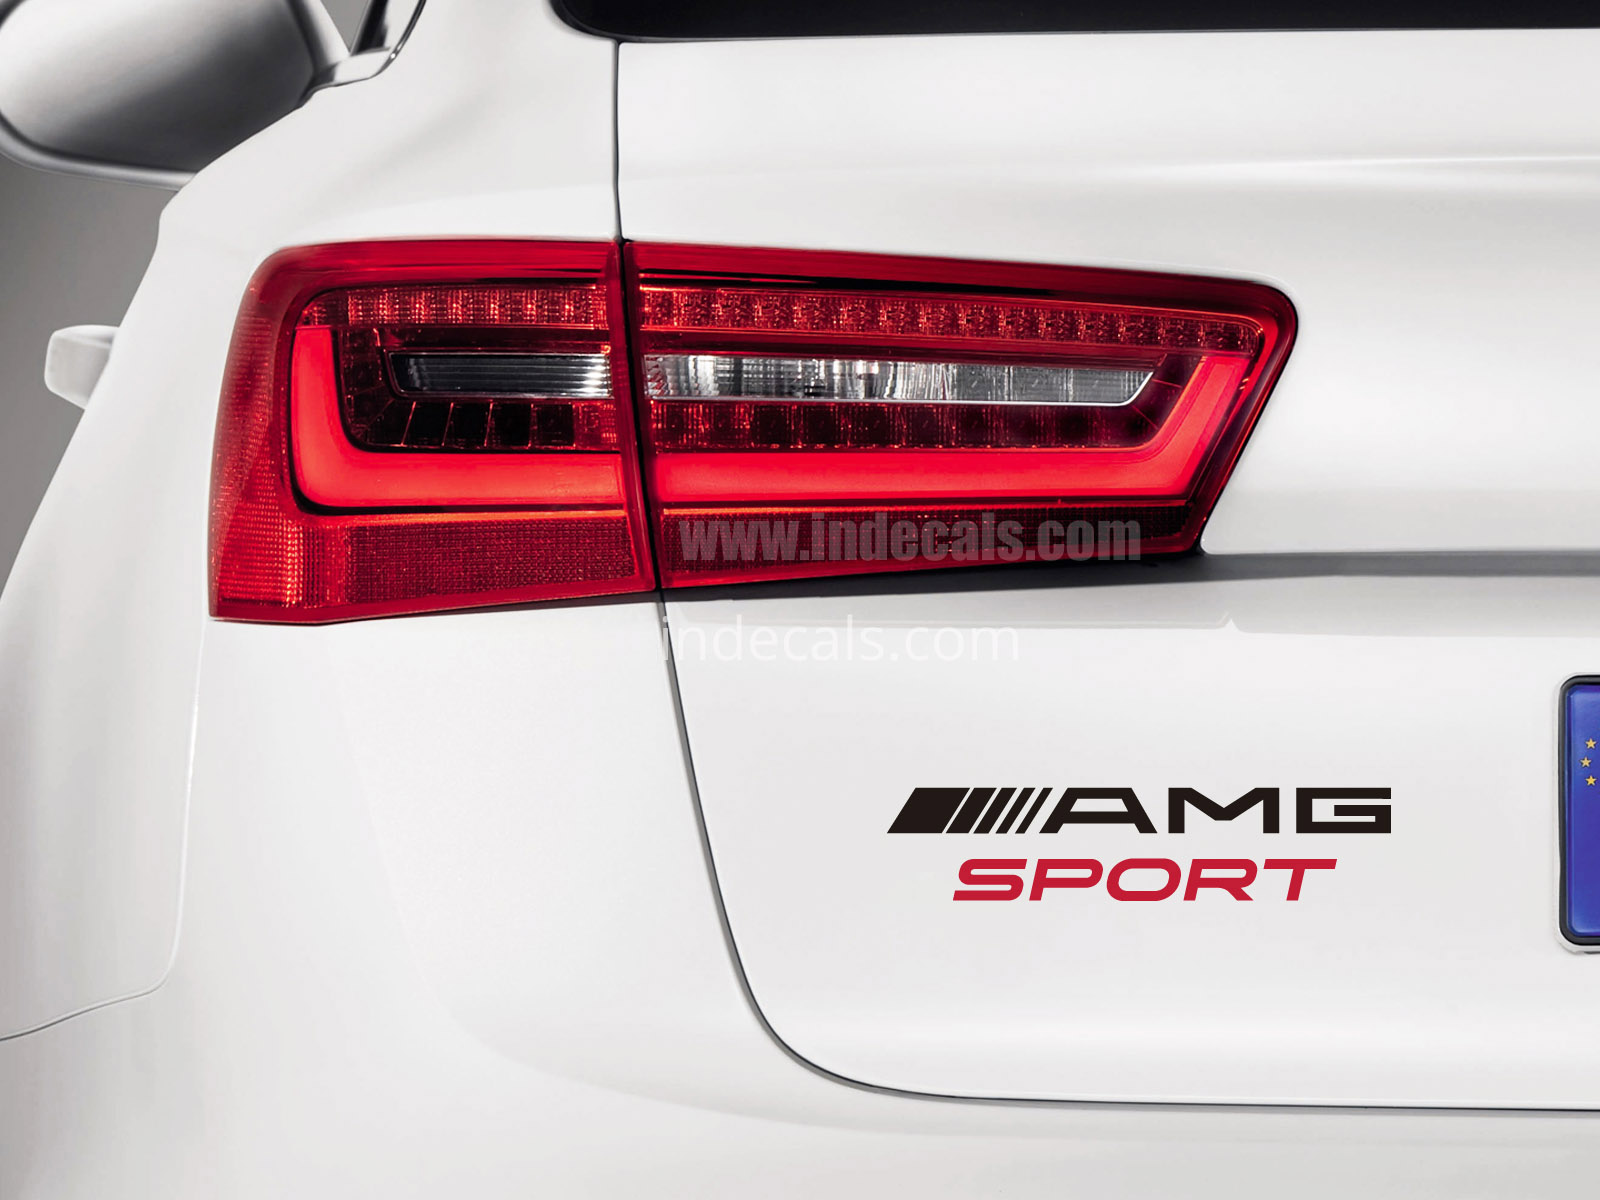 1 x AMG Sports Sticker for Trunk - Black & Red